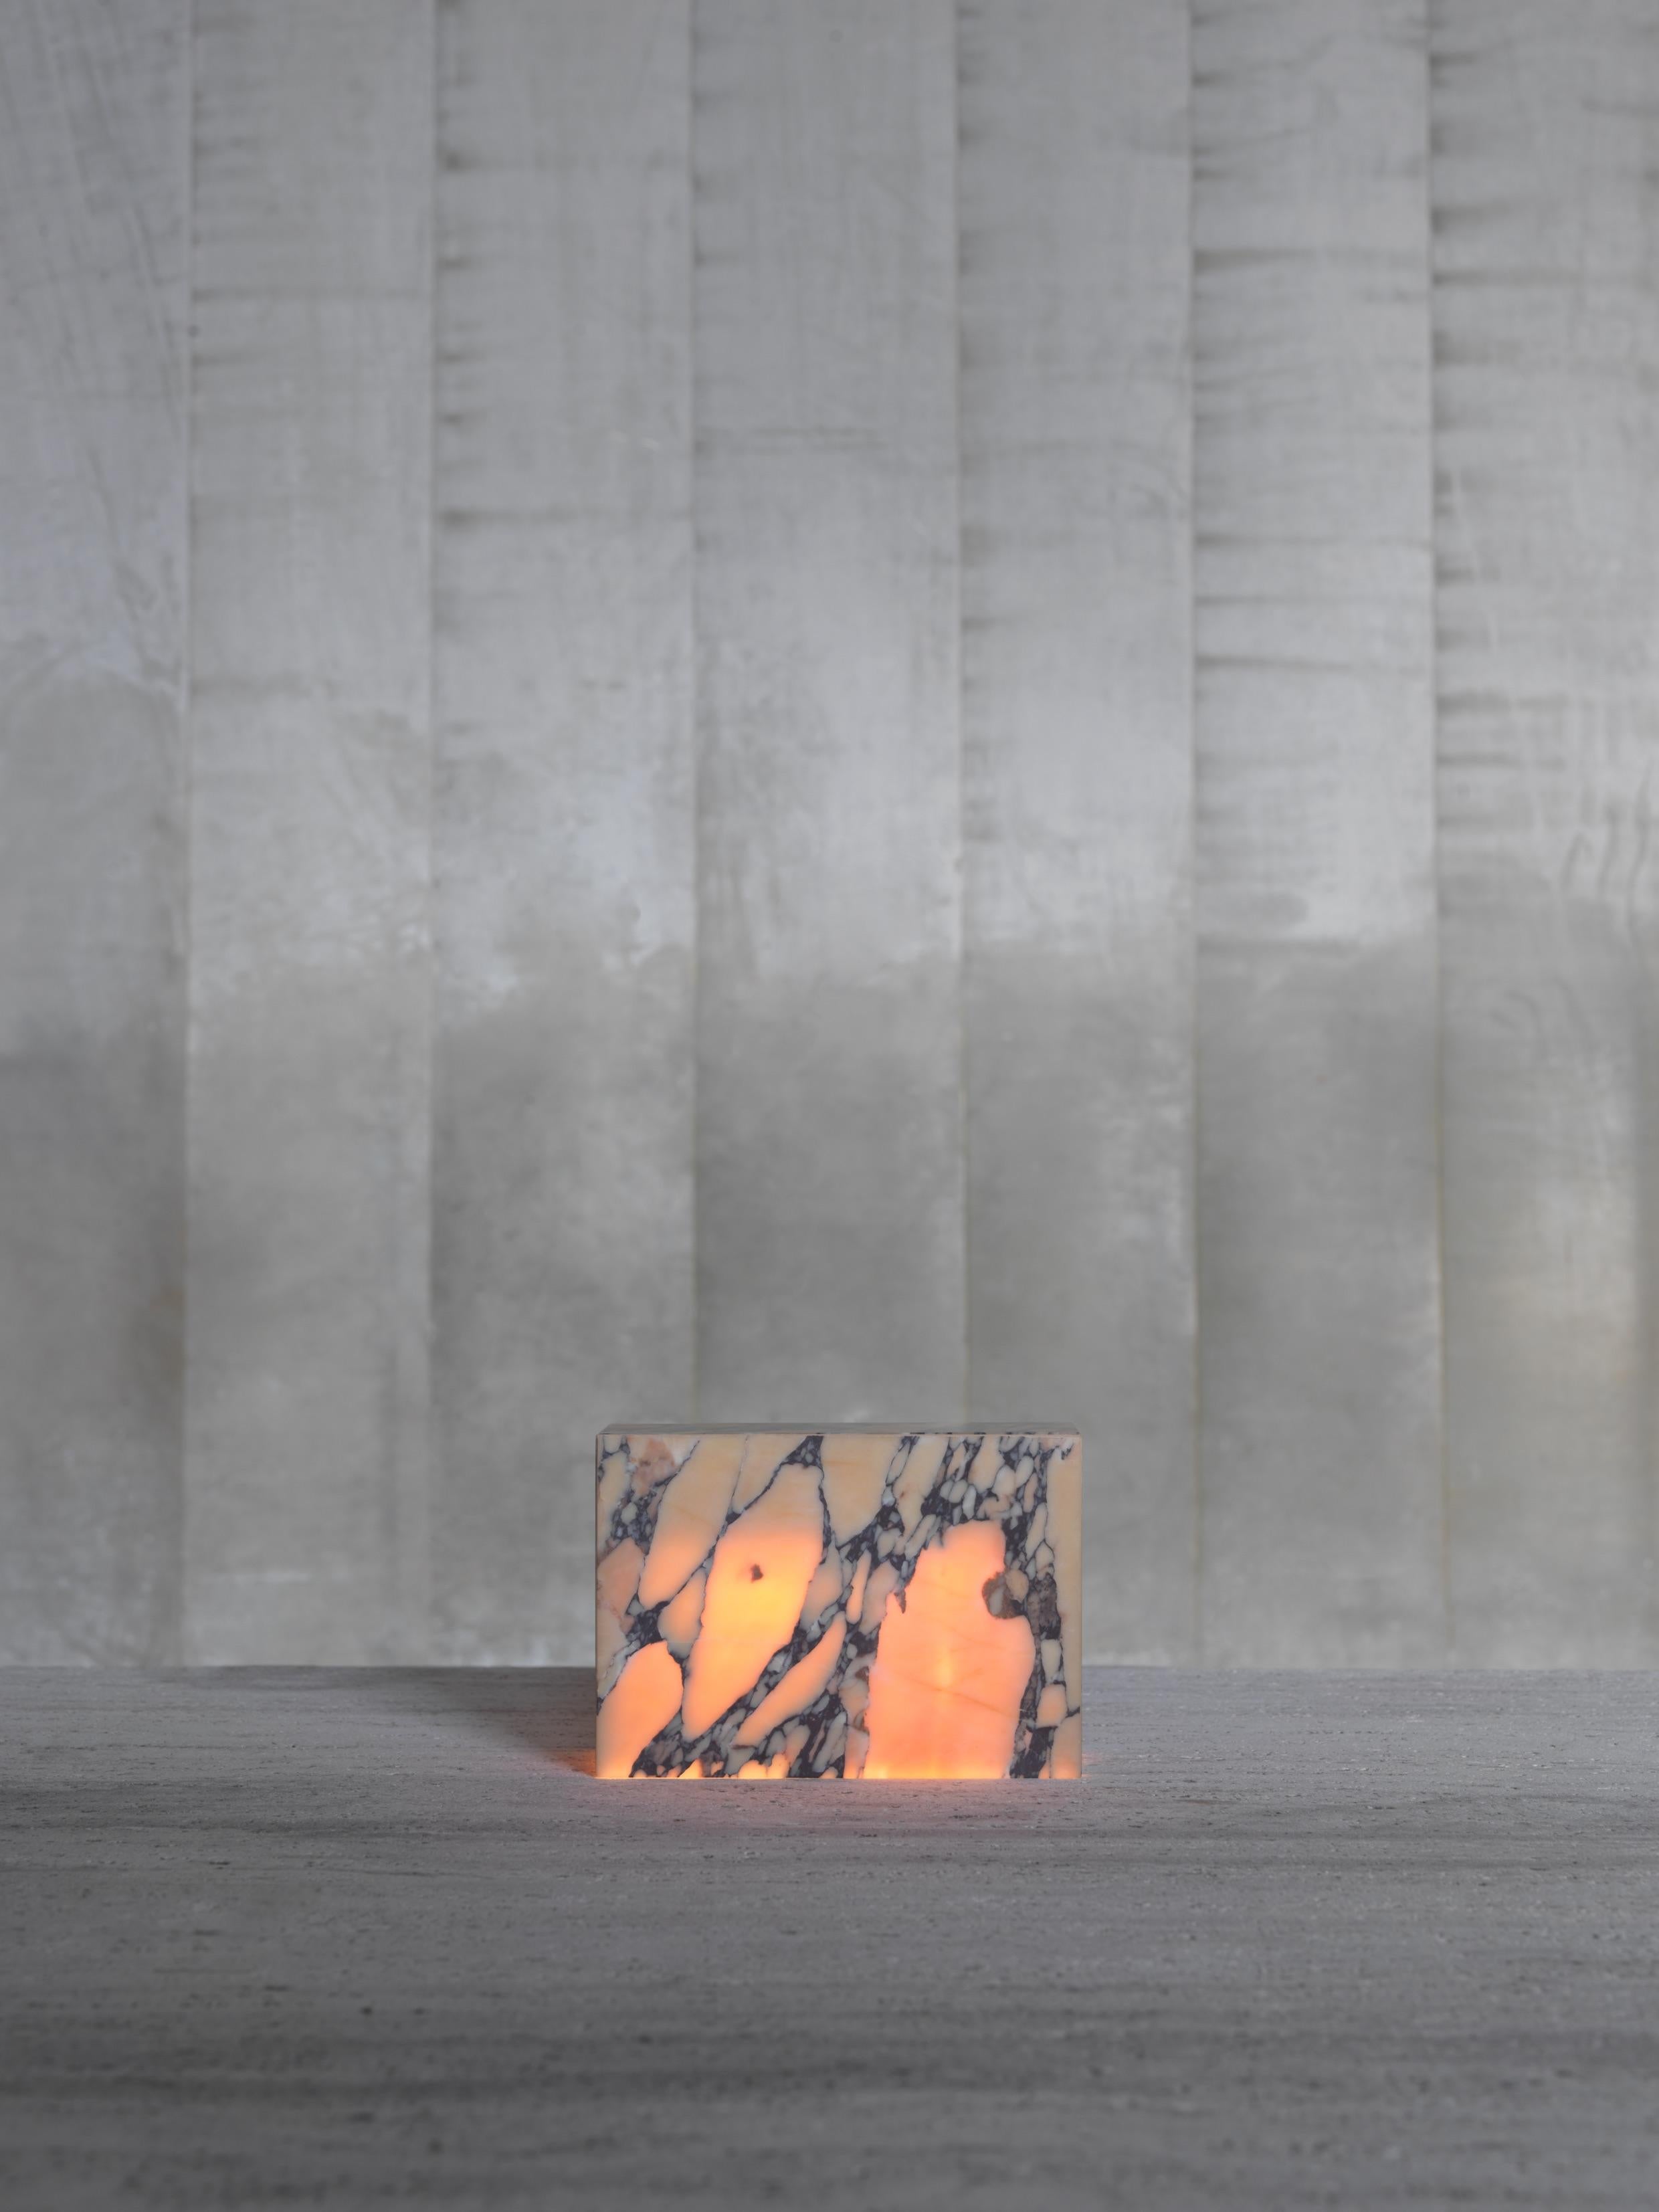 Marble Book A4 is presented by Koen van Guijze

Sophisticated and minimal, let the natural stone tell a good story. Like art, light objects can give warmth and inspiration. Koen has creates several light objects that give comfort for the soul.